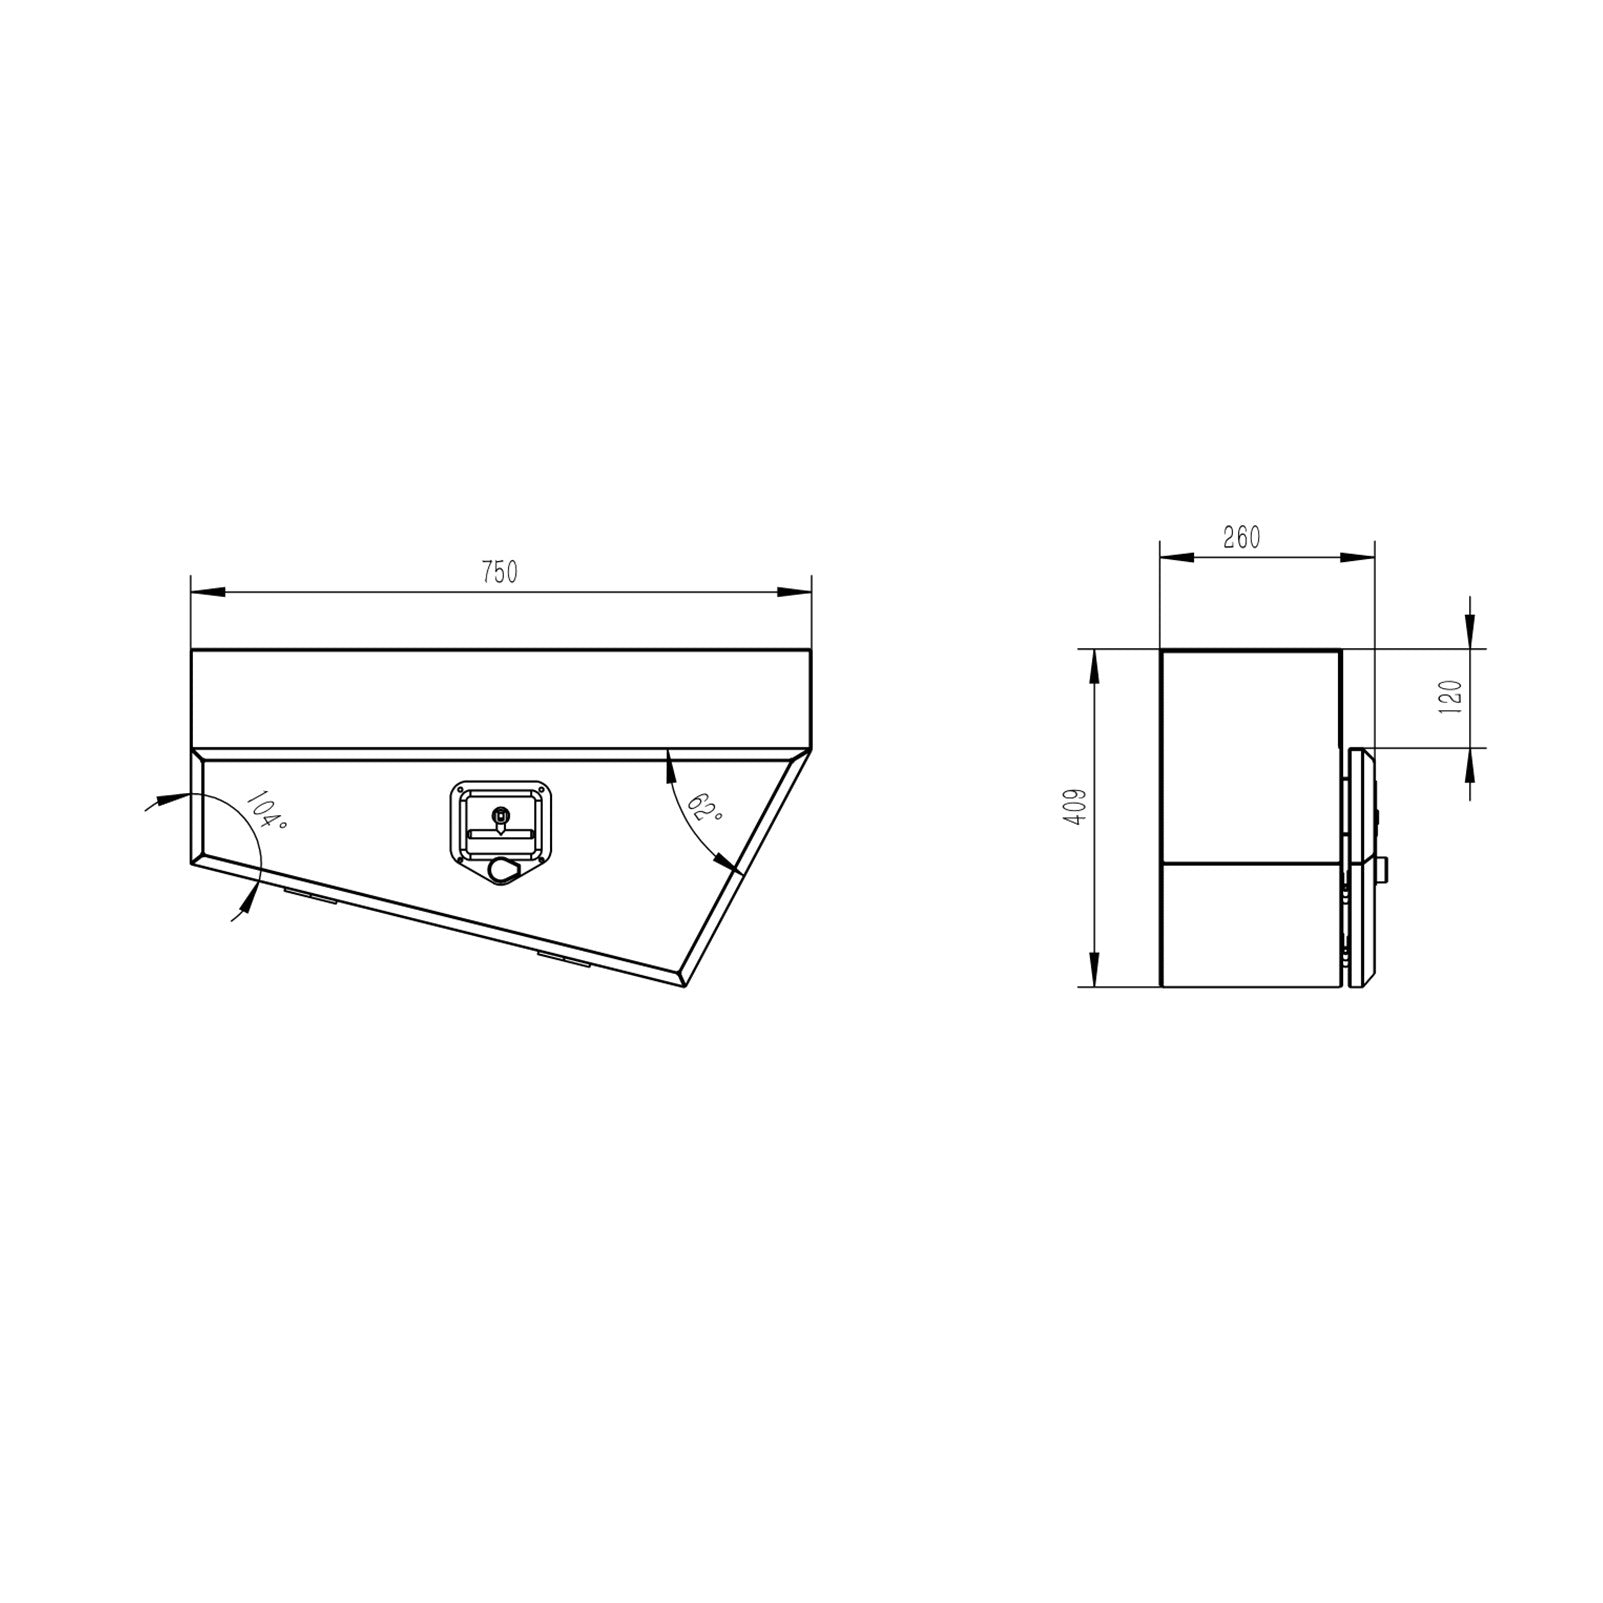 Under Tray Tool Box - 750mm White Steel